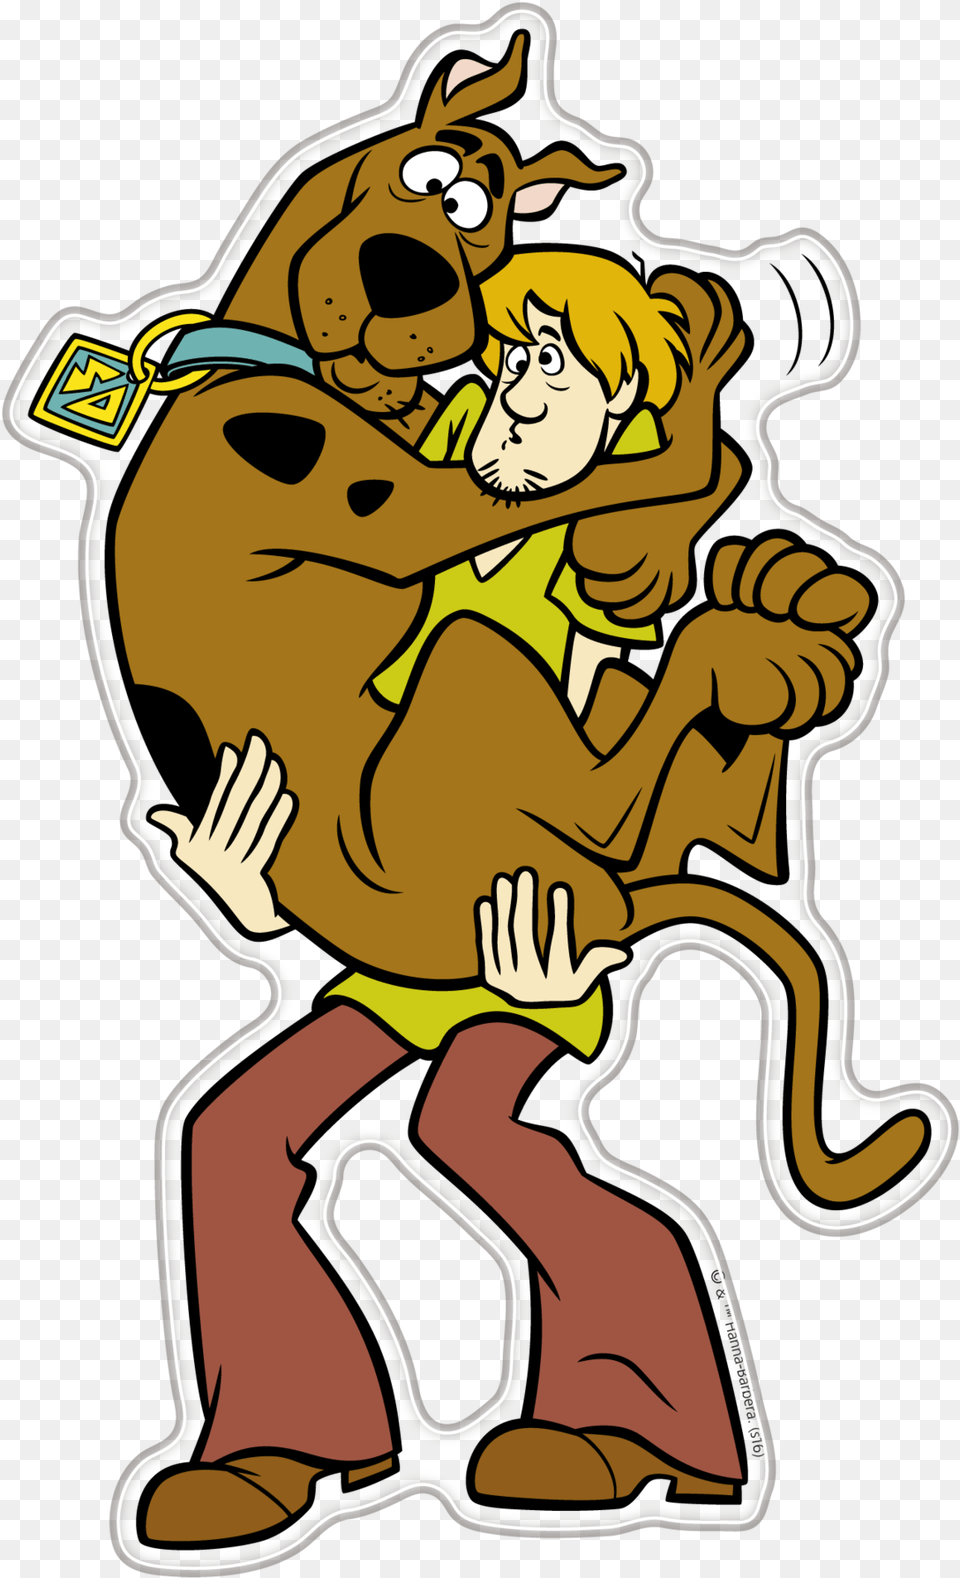 Scared Scooby Doo Shaggy Premium 3d Character Fan Emblem Scooby And Shaggy, Baby, Person, Cartoon, Face Free Transparent Png